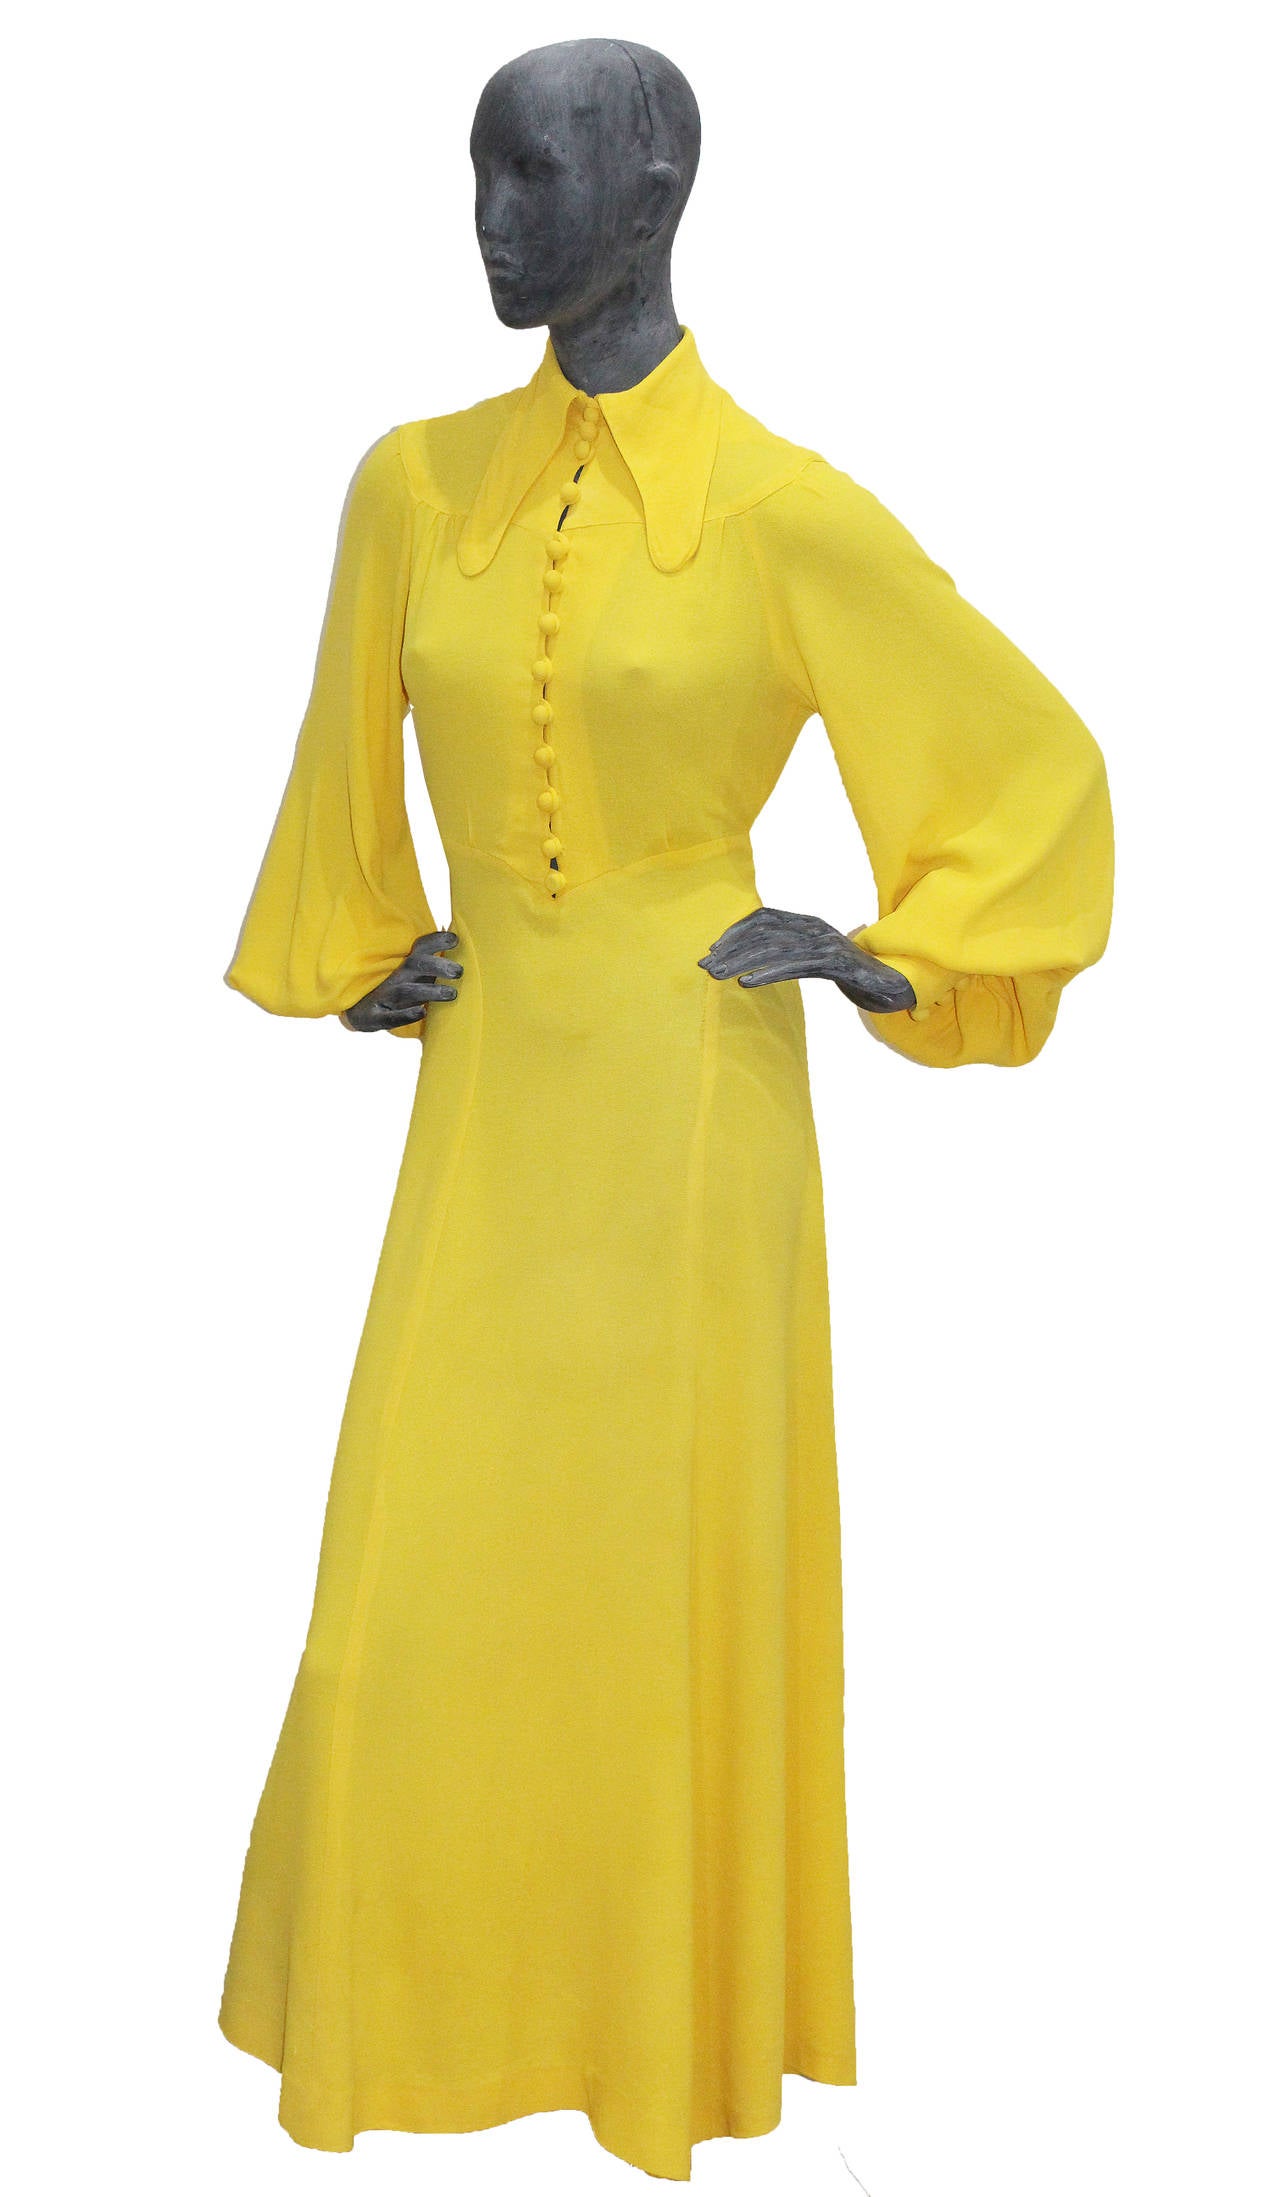 A 1975 brilliant yellow brilliant yellow moss crepe evening dress by Ossie Clark for Radley. Long curved collar, button-fronted bodice ending at the waist, love ribbon that ties to rear waist.

Sizing: This dress could fit anyone between a UK size